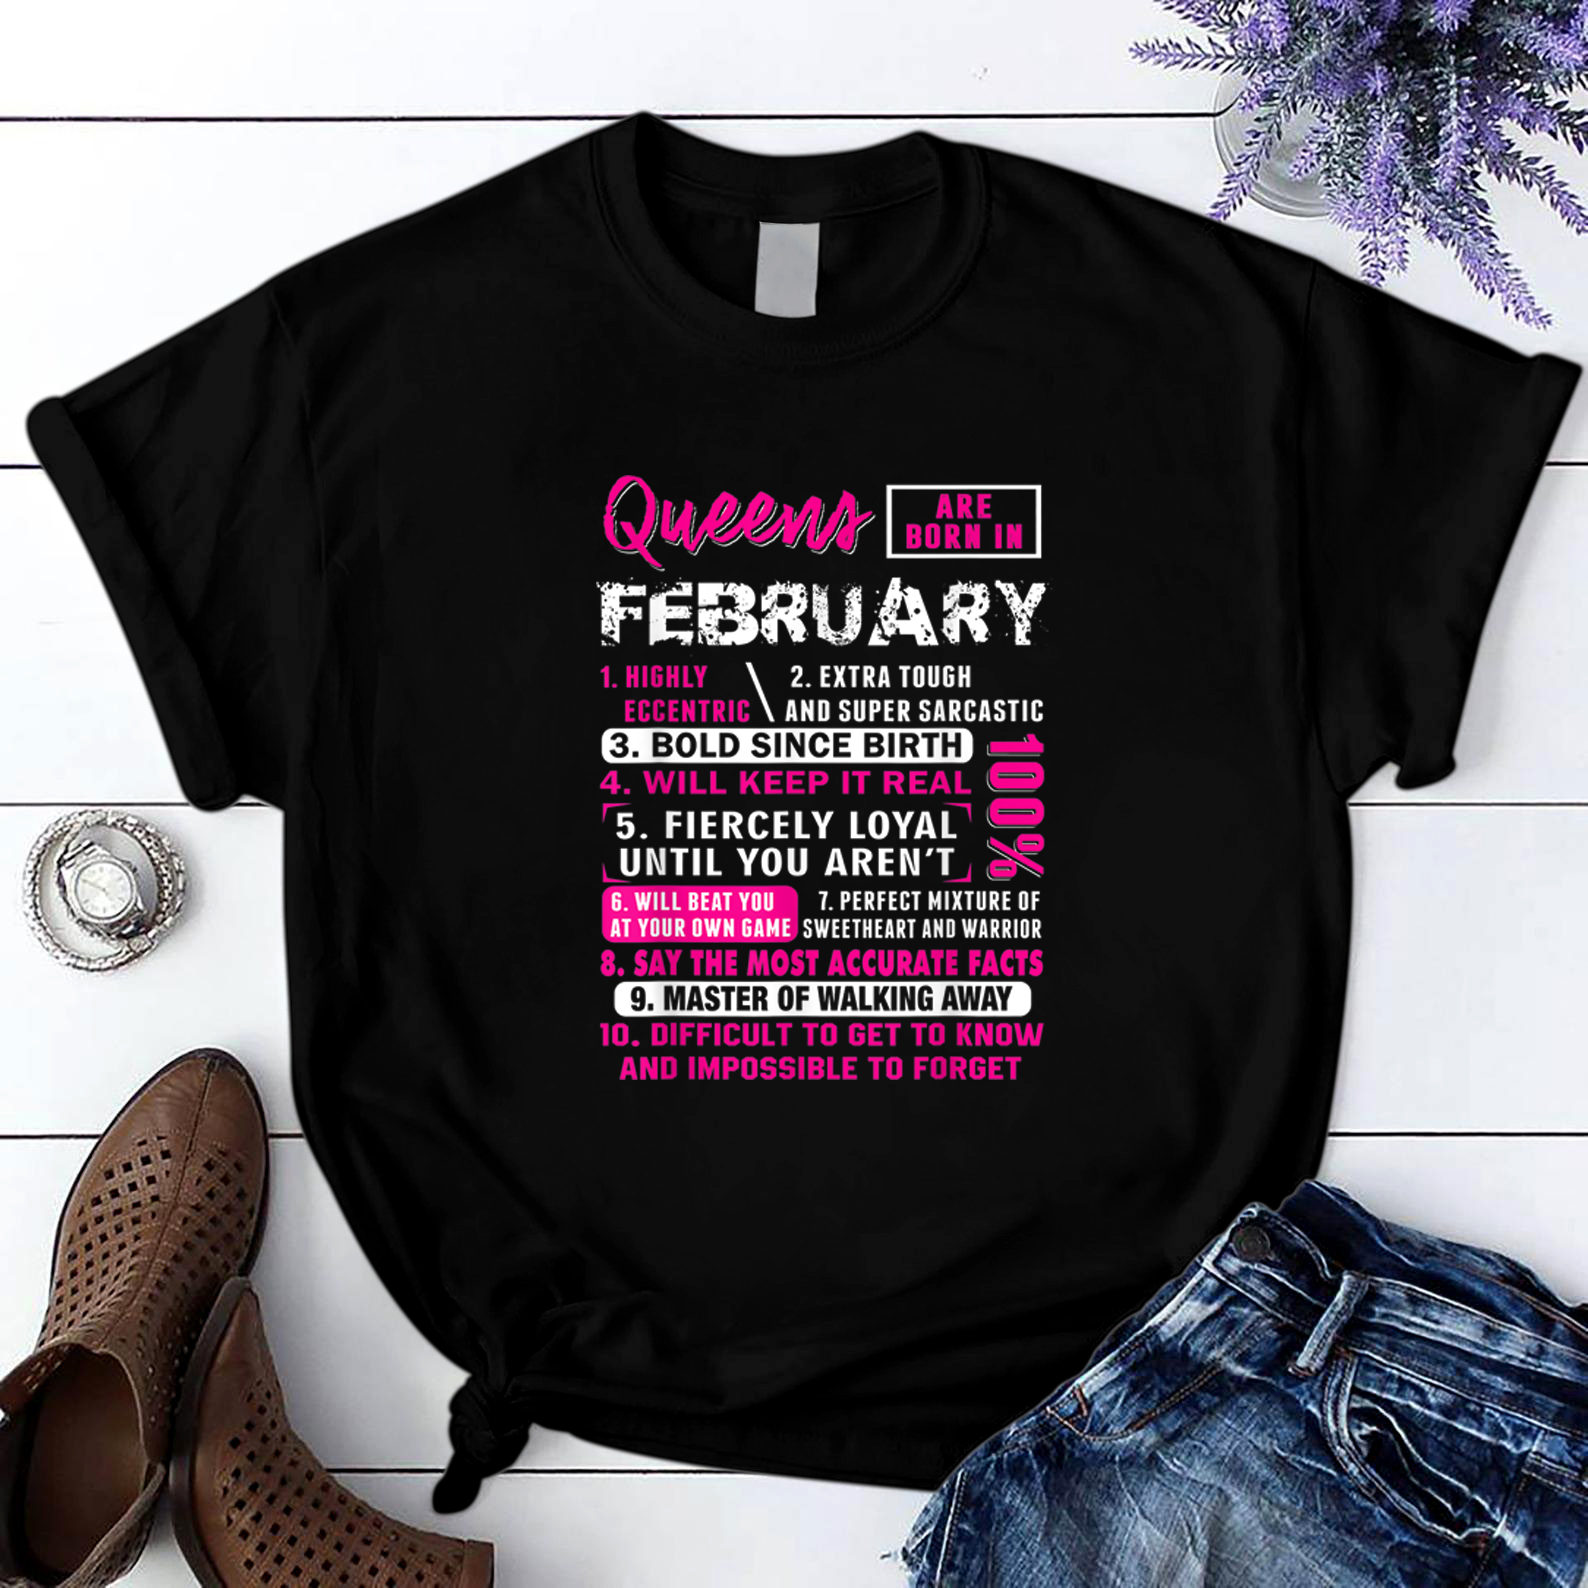 10 Queens Are Born In February Funny T Shirt Black Women S-3Xl